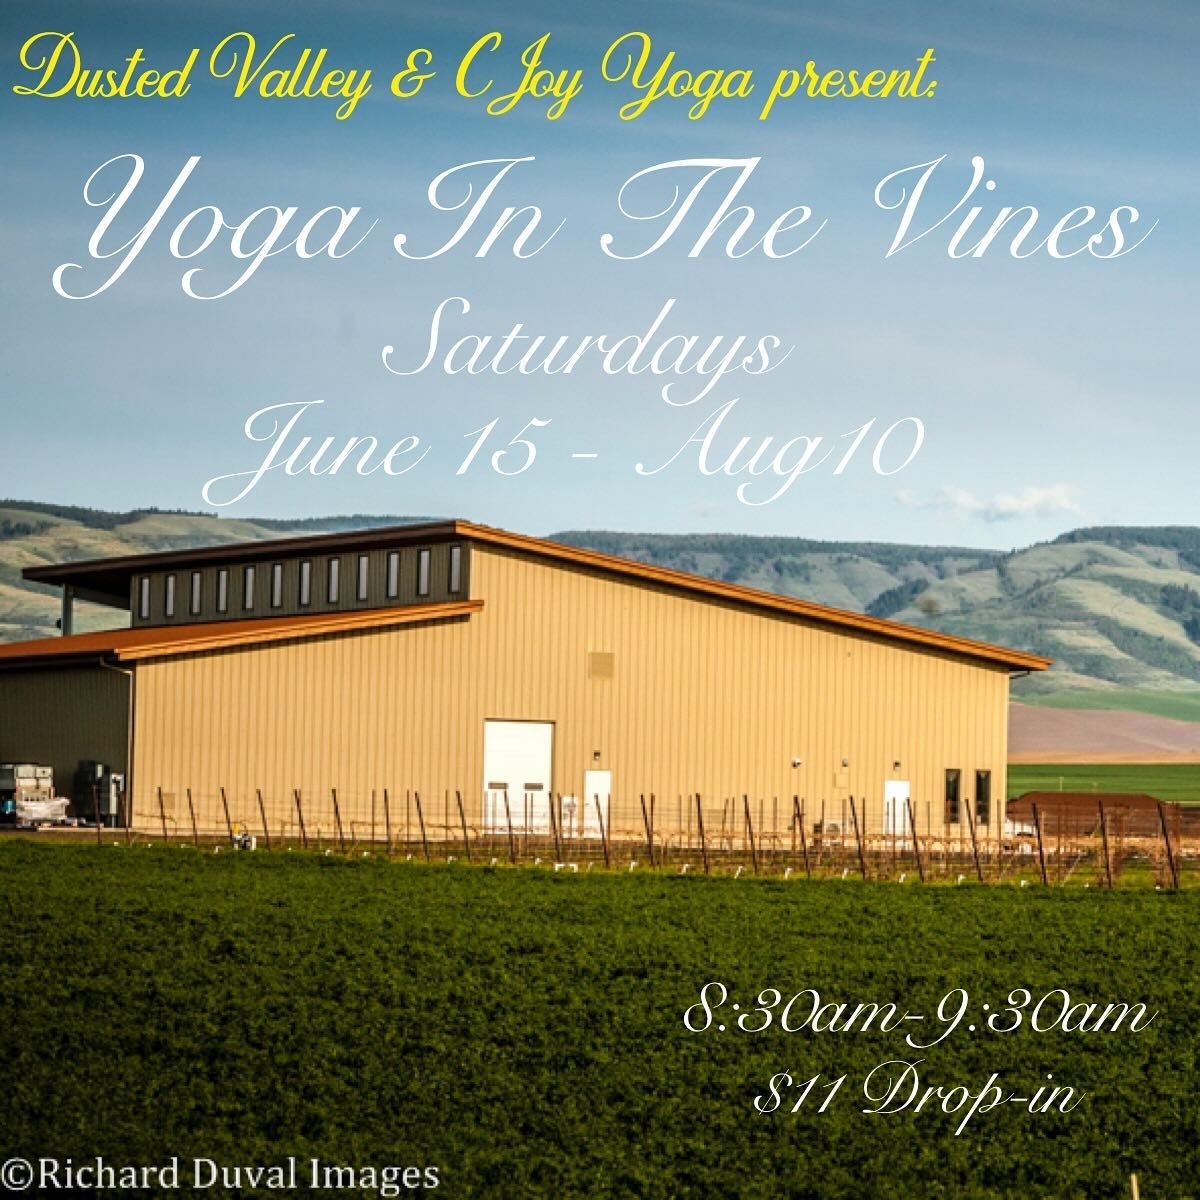 Yoga In The Vines is baaackkkkk! Come on out to enjoy getting your Yoga on, out of doors, before the heat!

Saturday mornings June 15 - Aug 10.
Location: @dustedvalleywine (980 Merlot Dr) next to the Sconi Estate Vineyard in a lovely patch of grass o